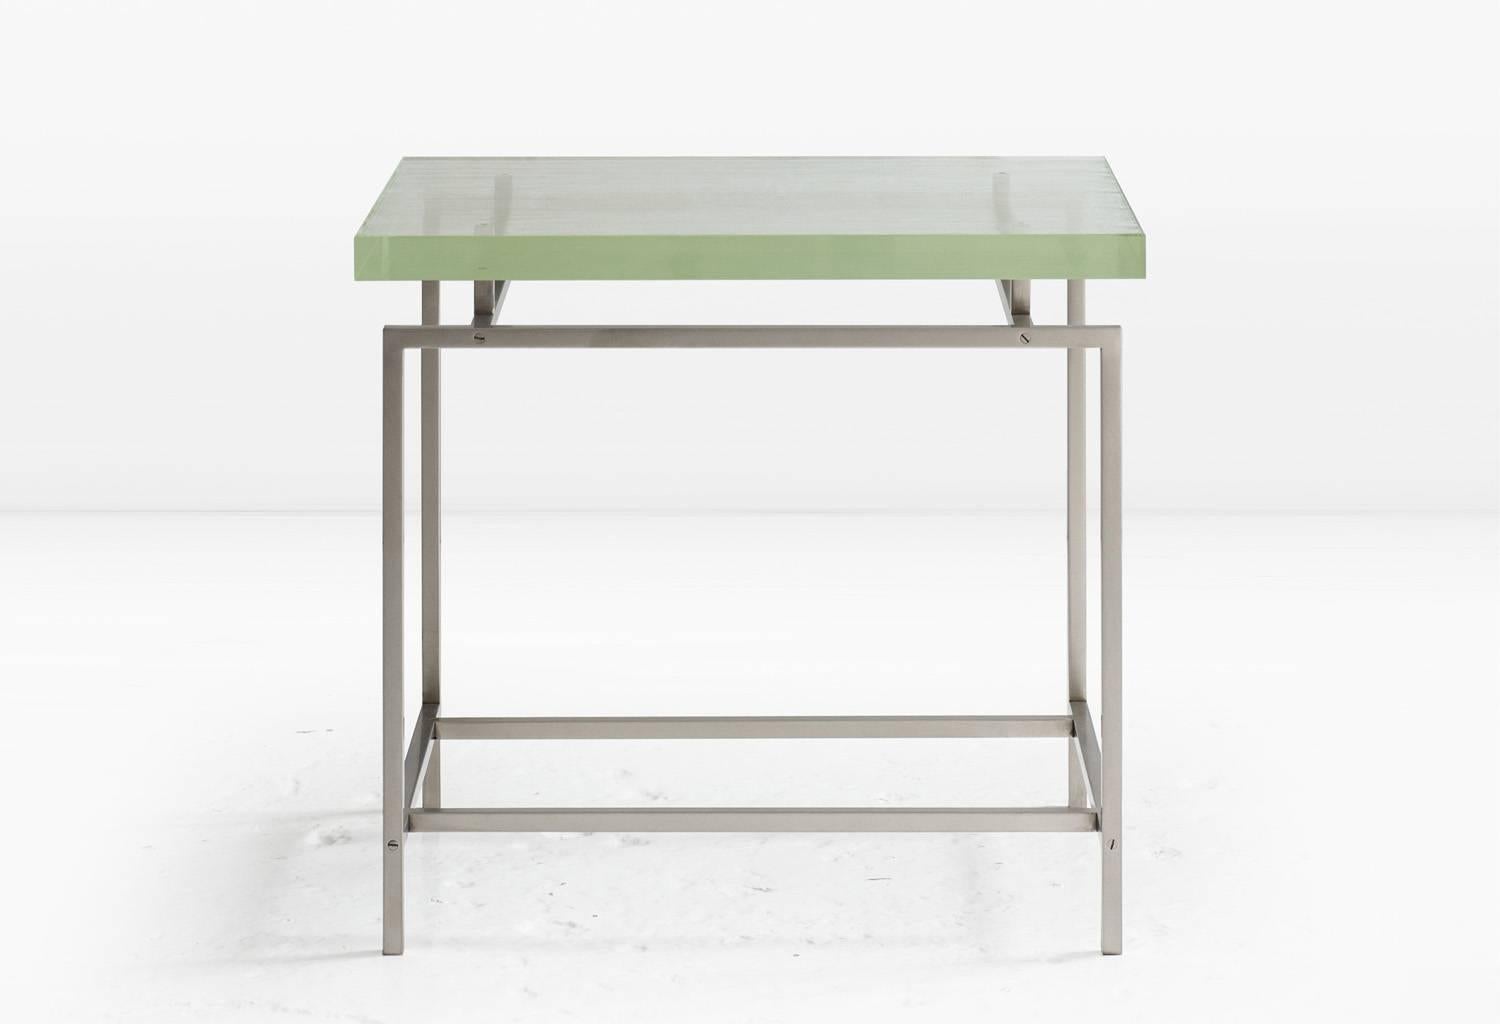 A slab of impossibly thick Borosilicate glass floats above a metal base which, rather than being welded, is fastened with delicate metal screws. Base is shown in nickel with matching screws (also available in Silicon Bronze). The top is shown with